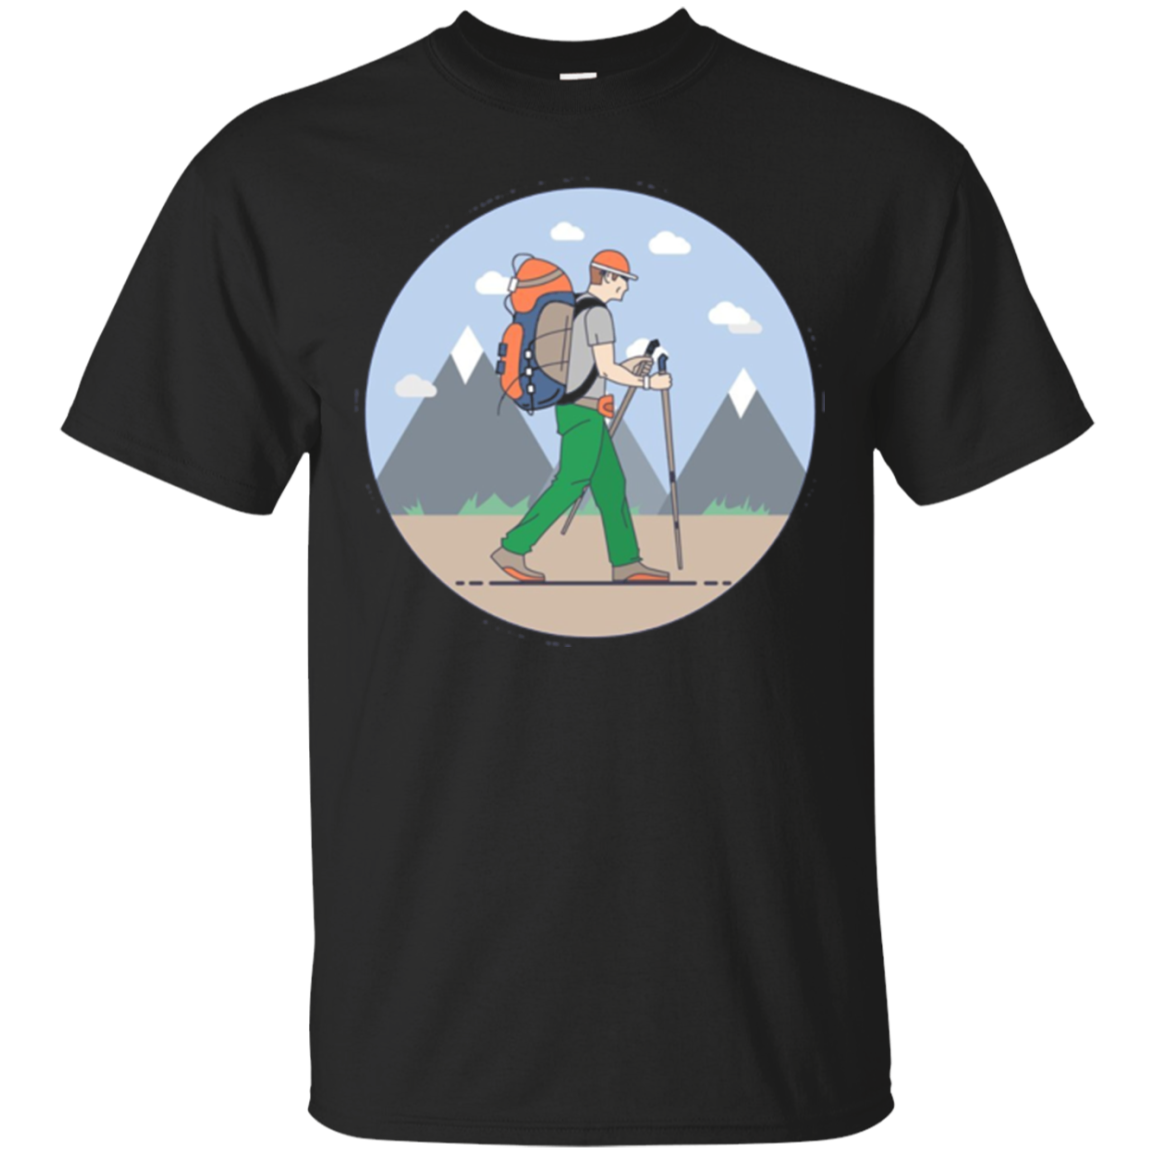 Backpacking Hiker Cartoon With Mountains T-shirt